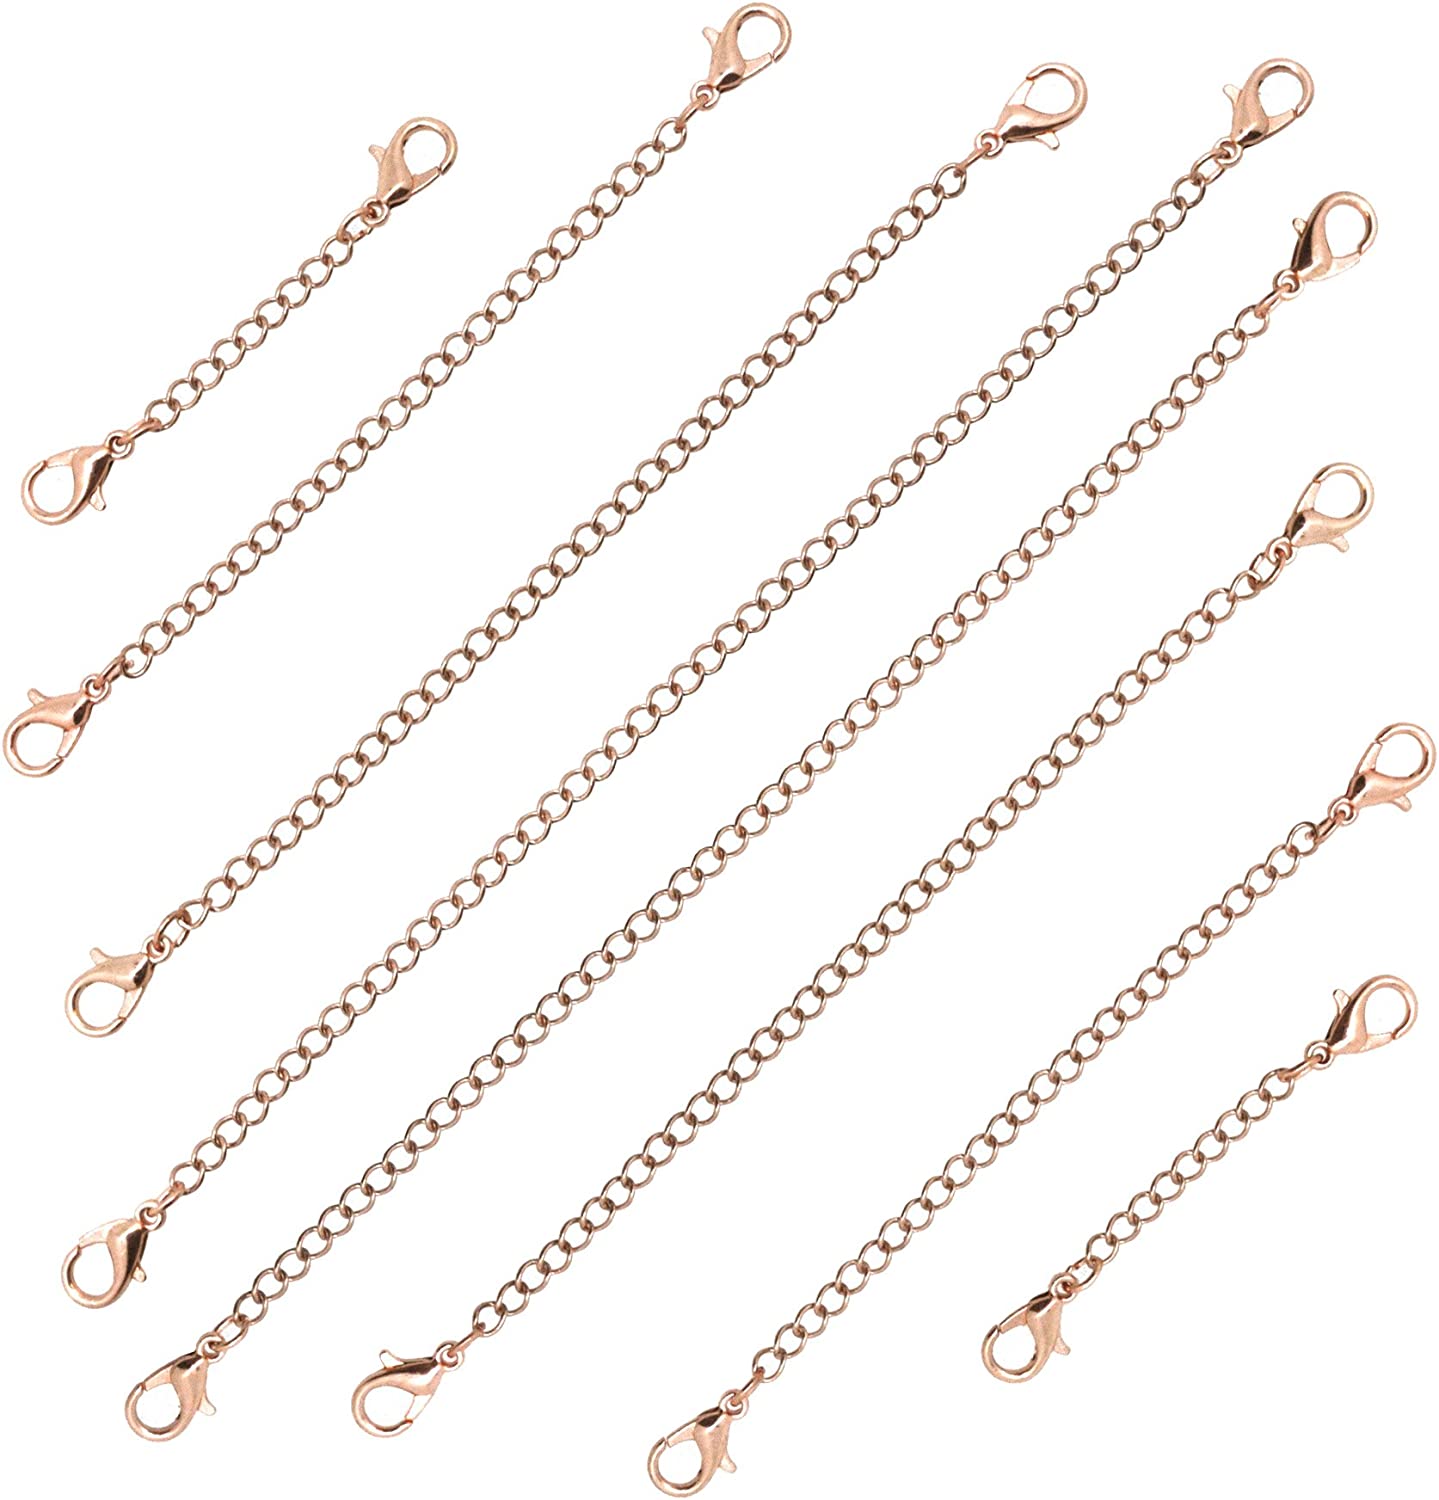  Paxcoo 12Pcs Chain Extender Jewelry Necklace Lobster